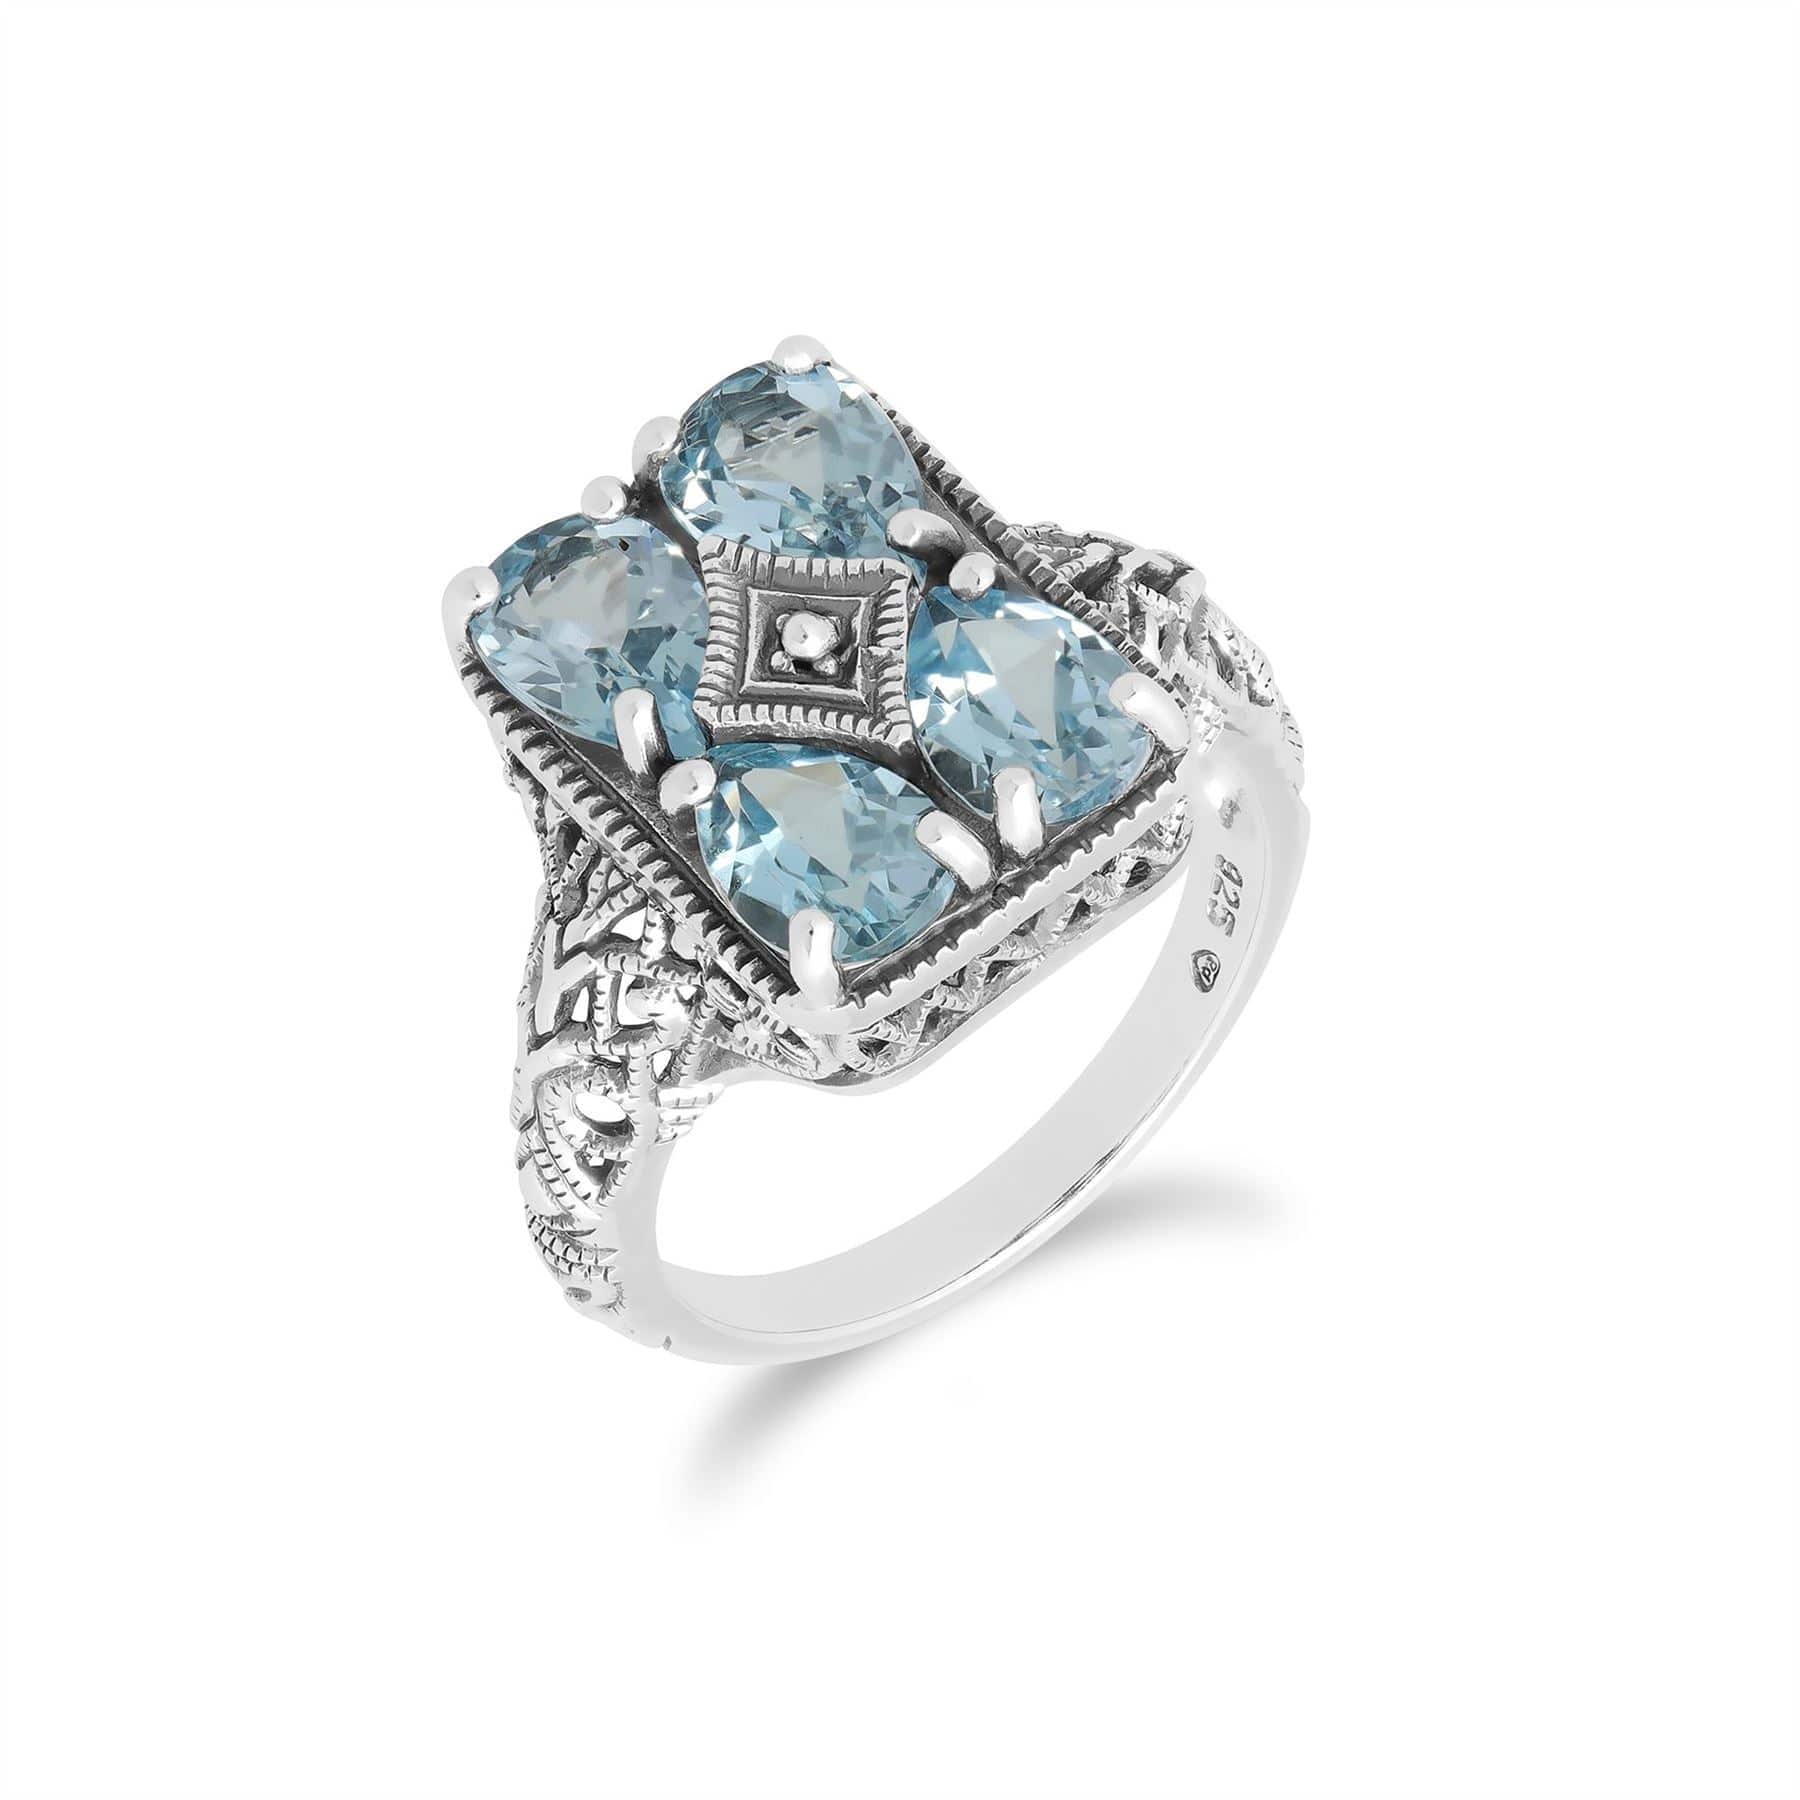 Image of Art Nouveau Inspired Blue Topaz Statement Ring in 925 Sterling Silver